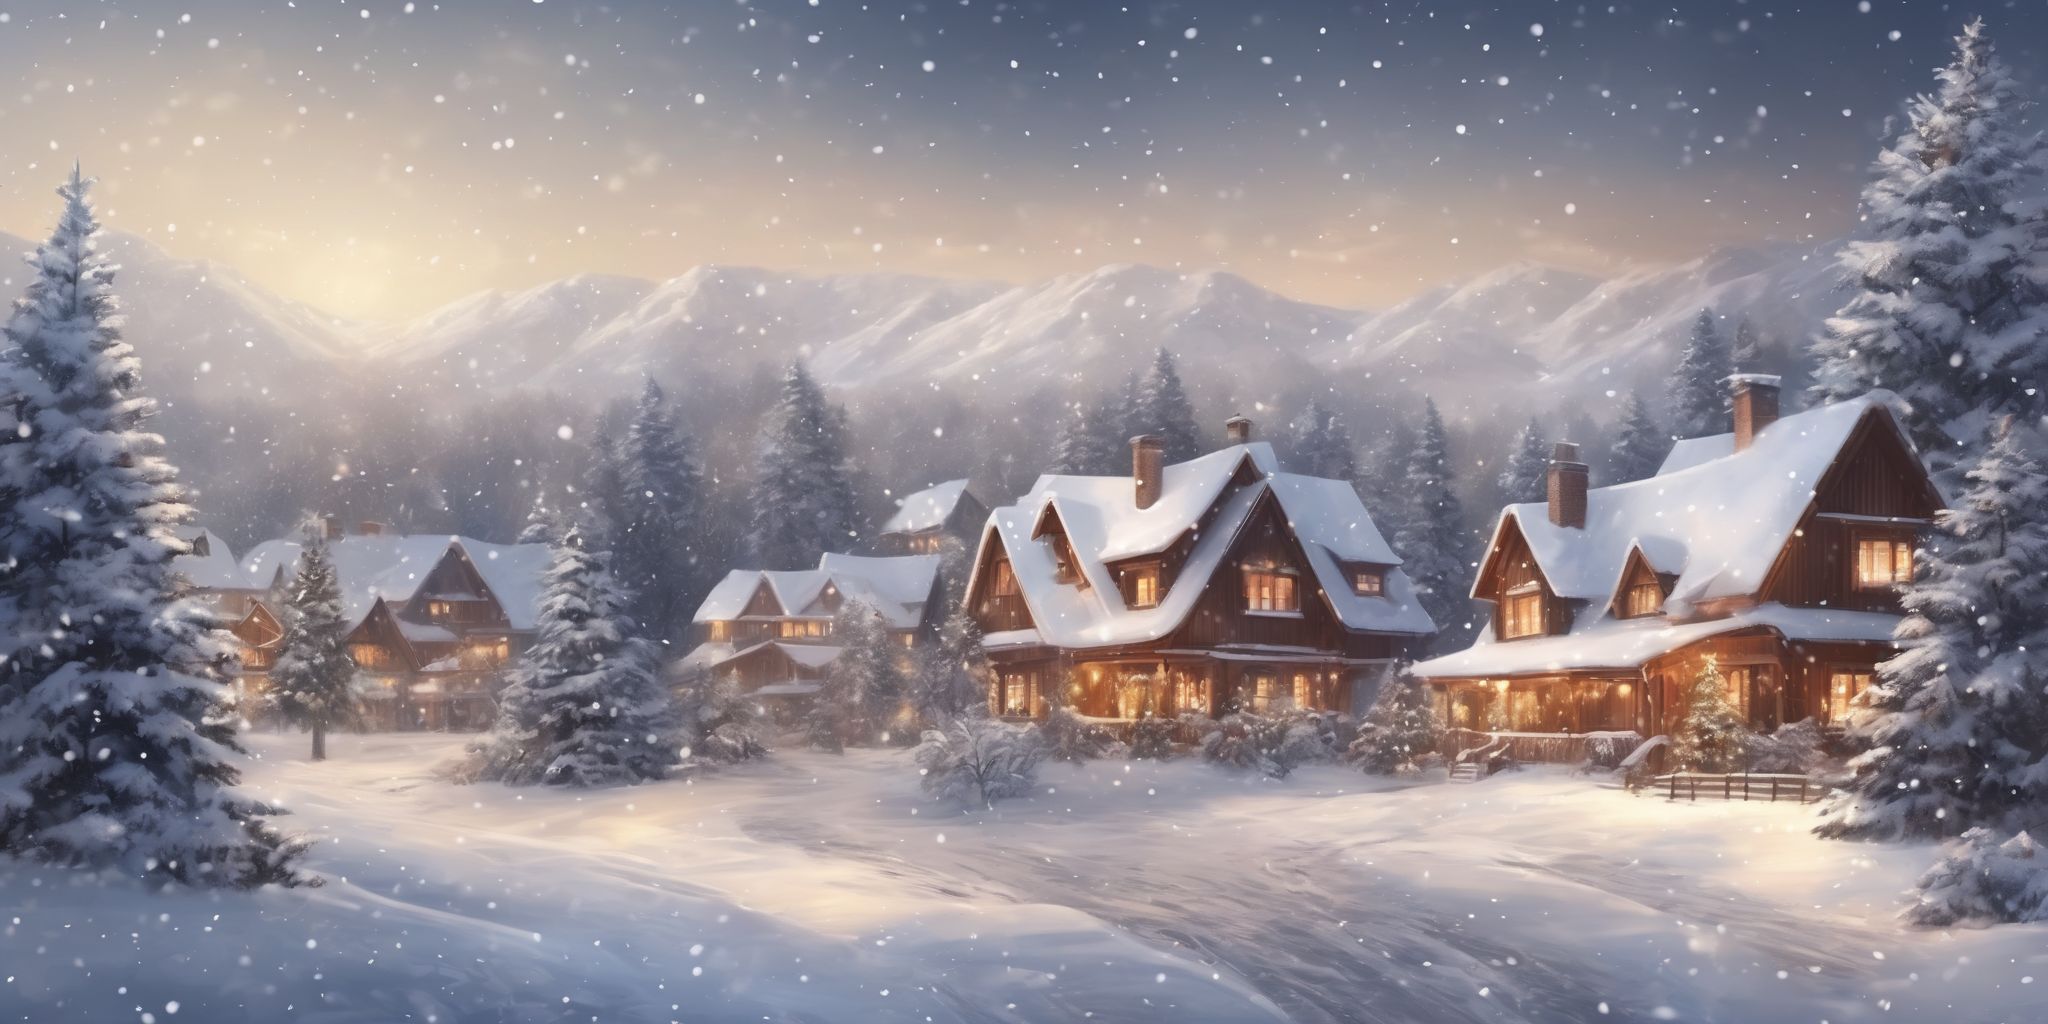 Snowy bliss in realistic Christmas style